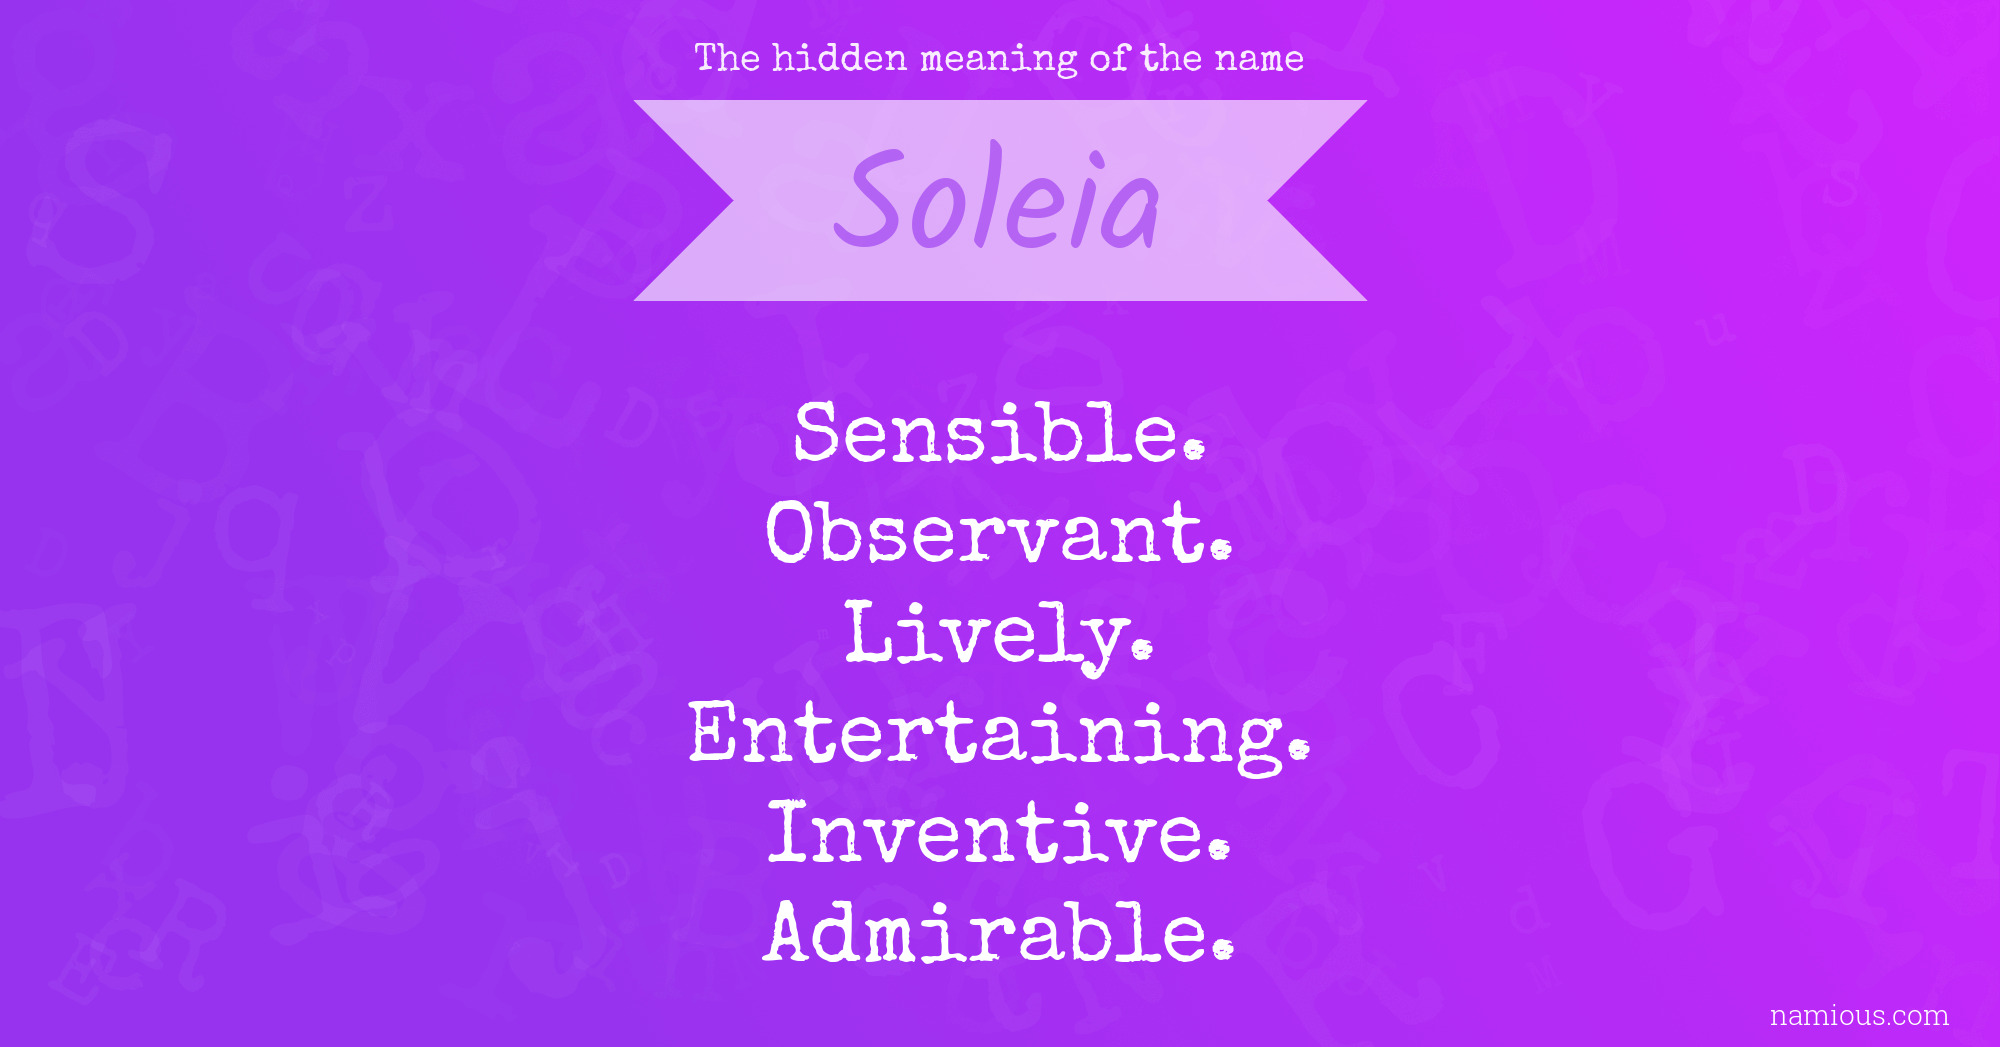 The hidden meaning of the name Soleia